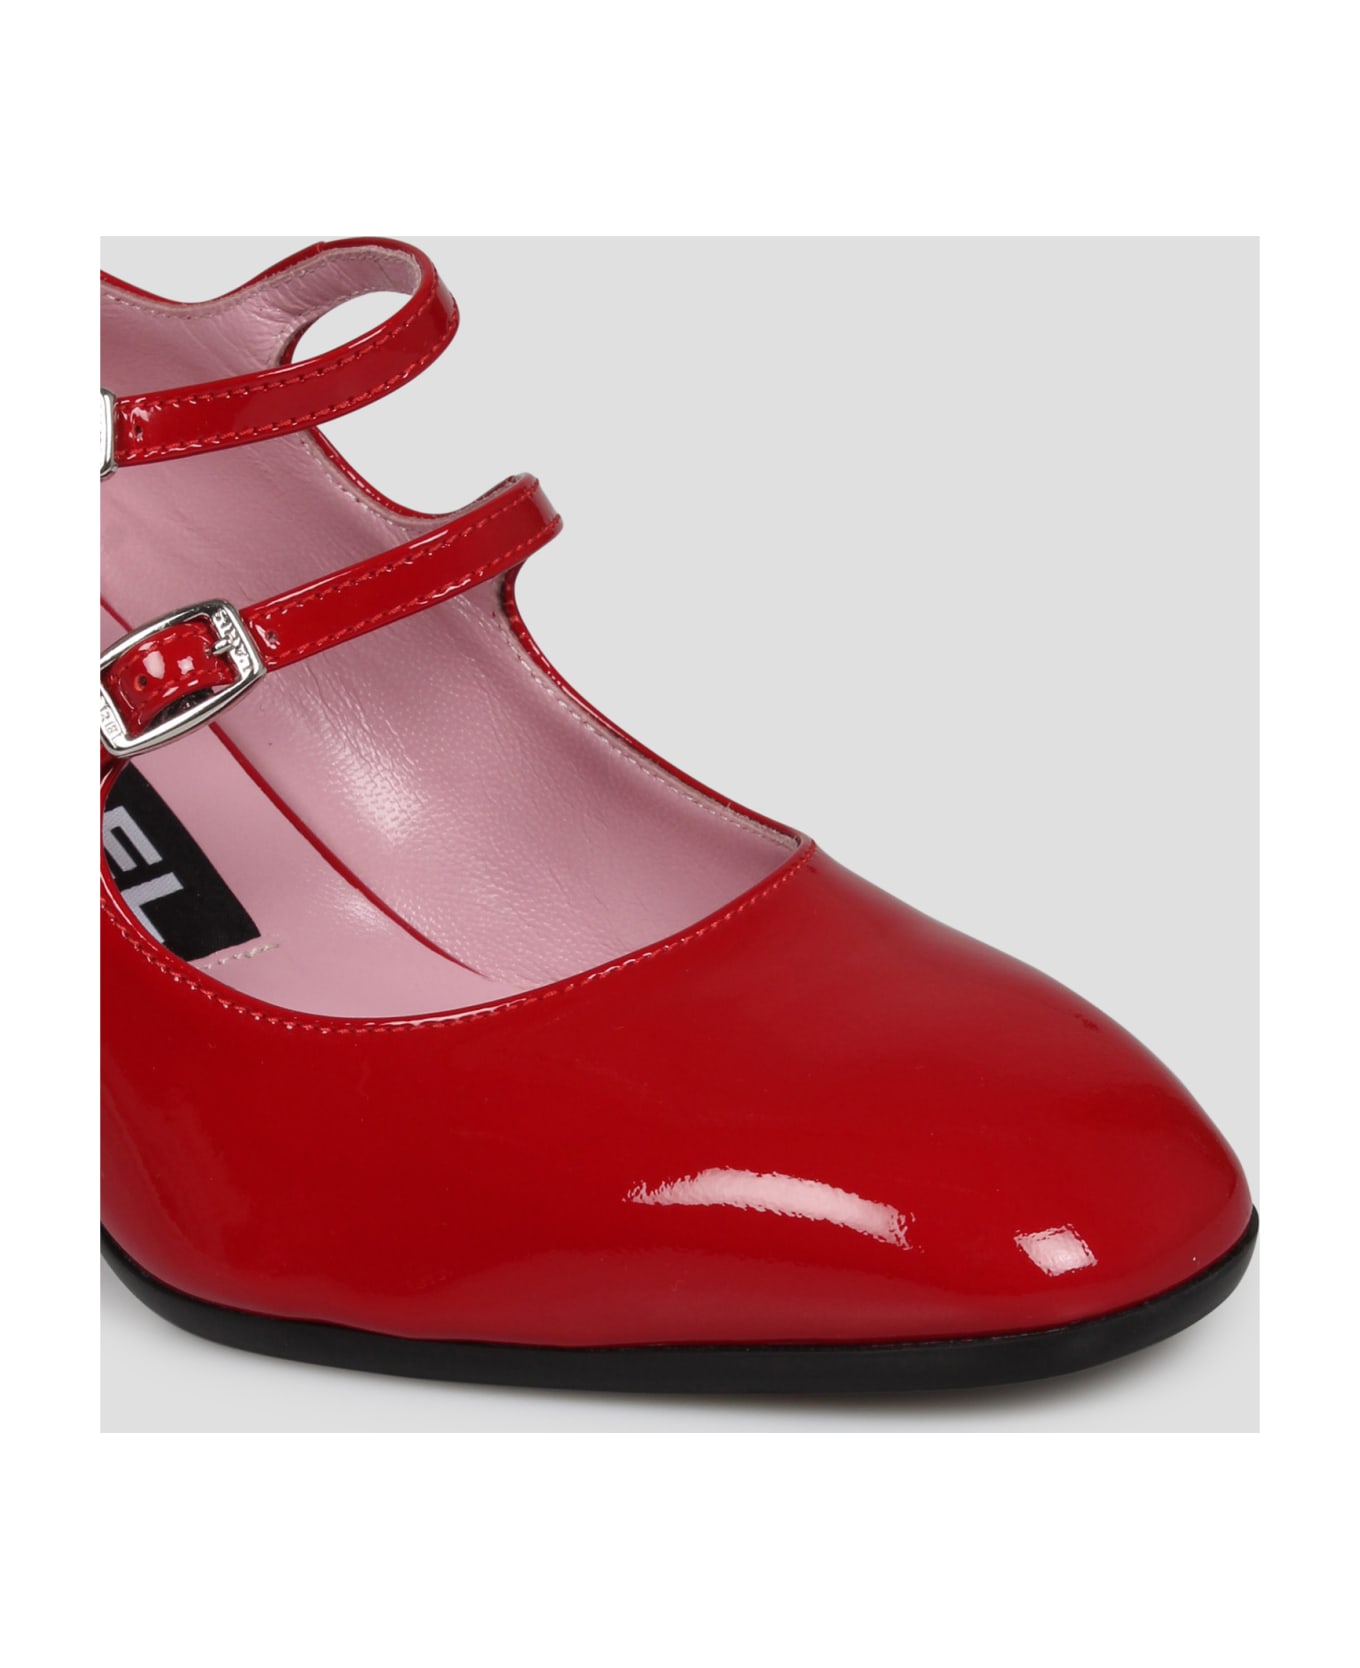 Carel Alice Mary Jane Pumps - Red ハイヒール